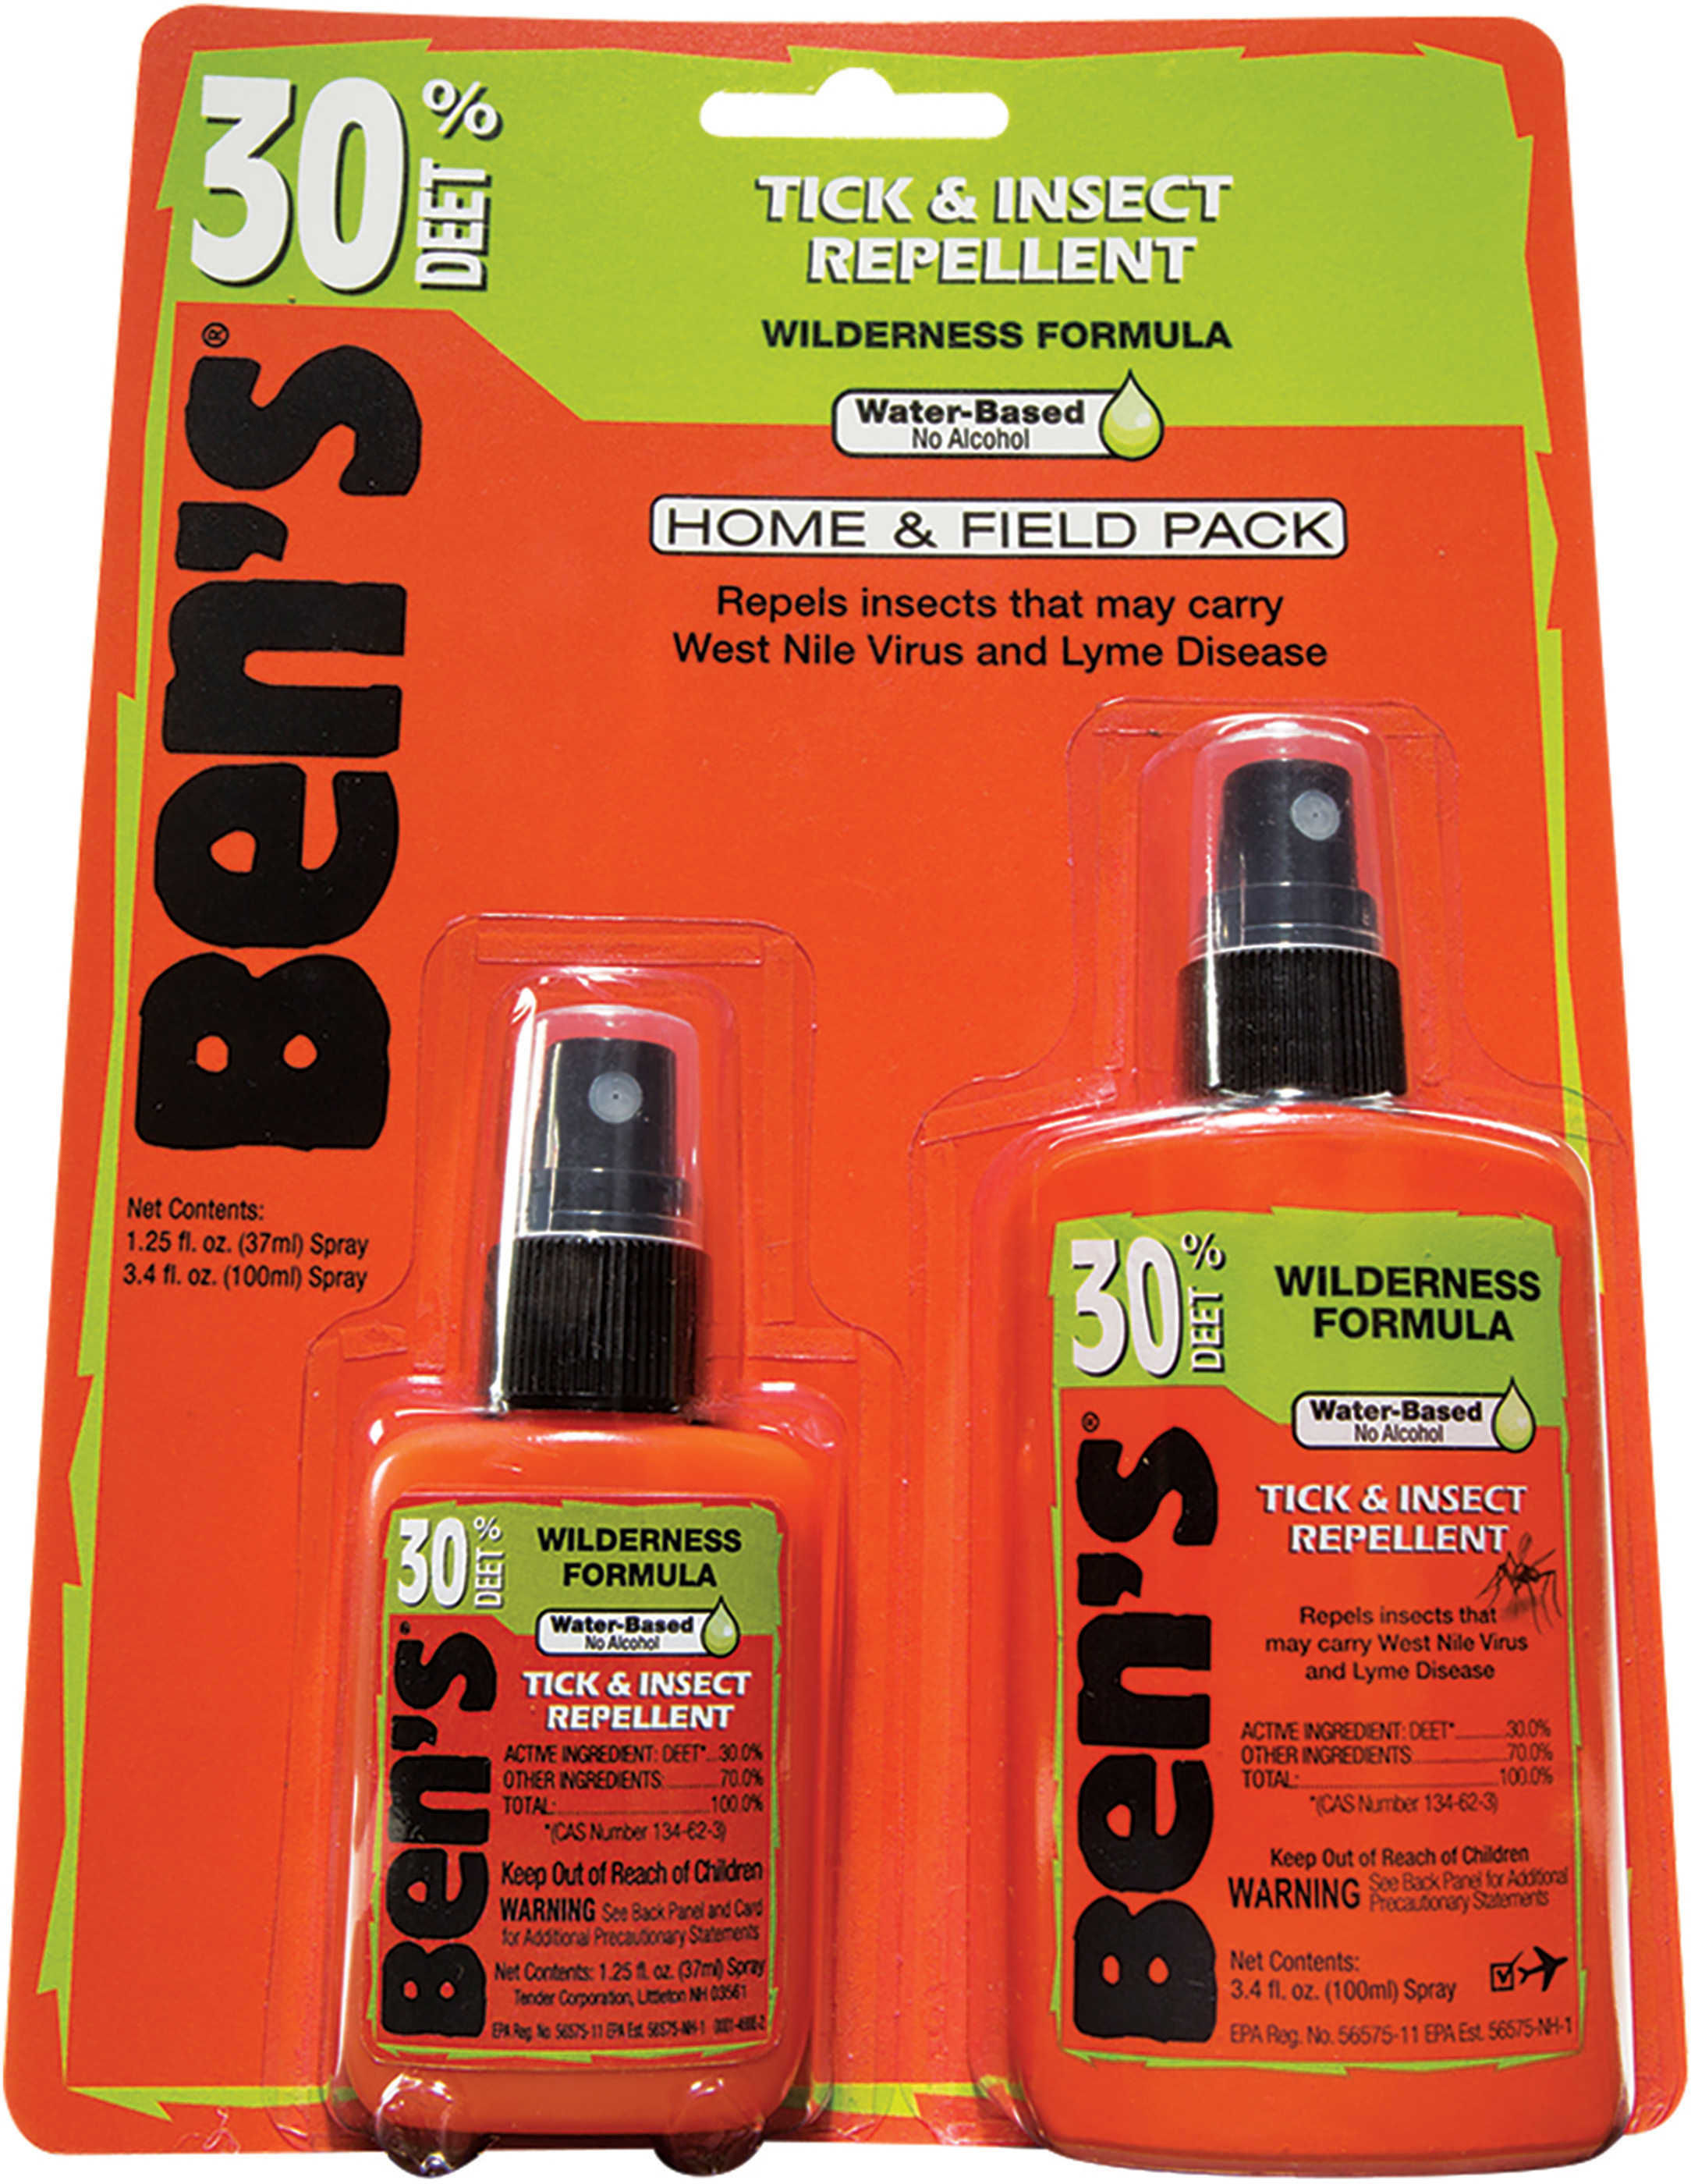 Bens / Tender Corp Home & Field Pack 3.4Oz And 1.25 Oz Md: 0006-7185